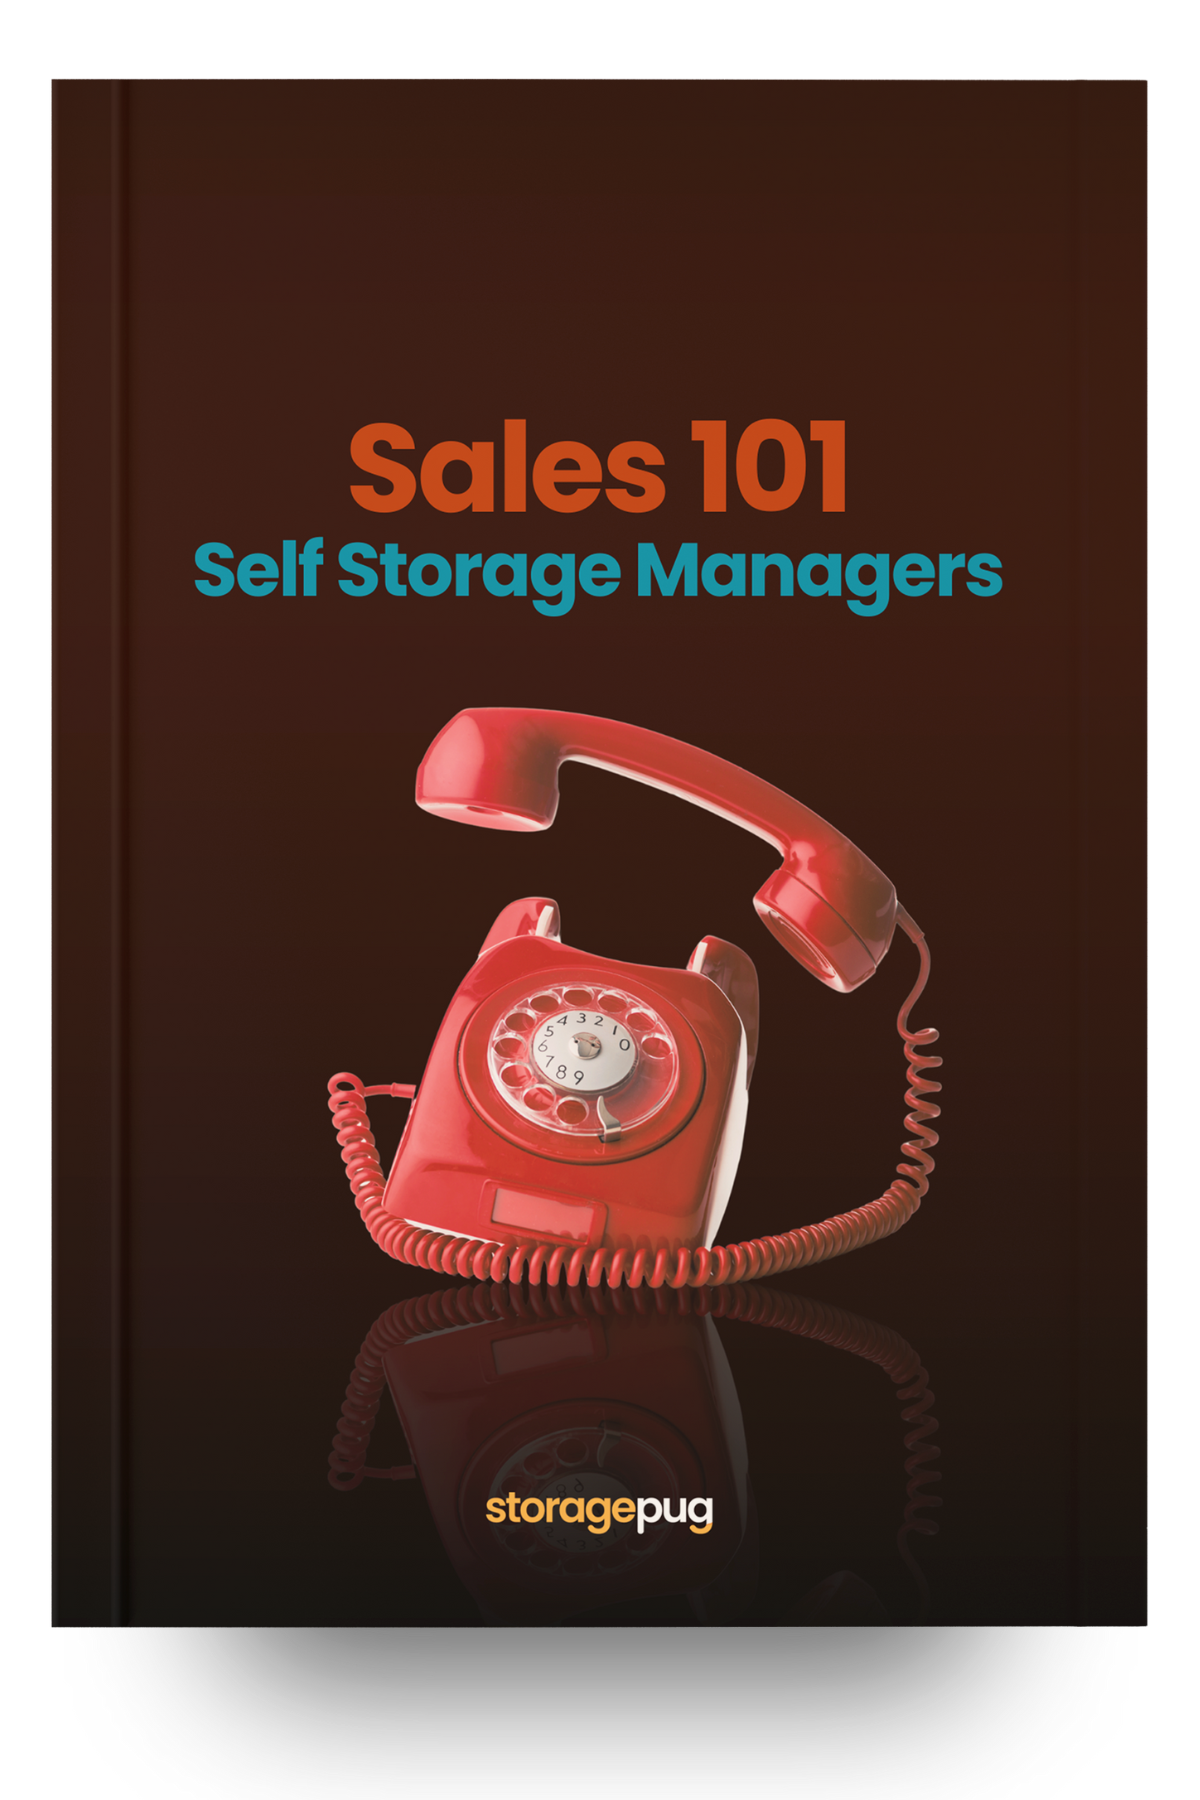 Sales 101 for Self Storage Managers